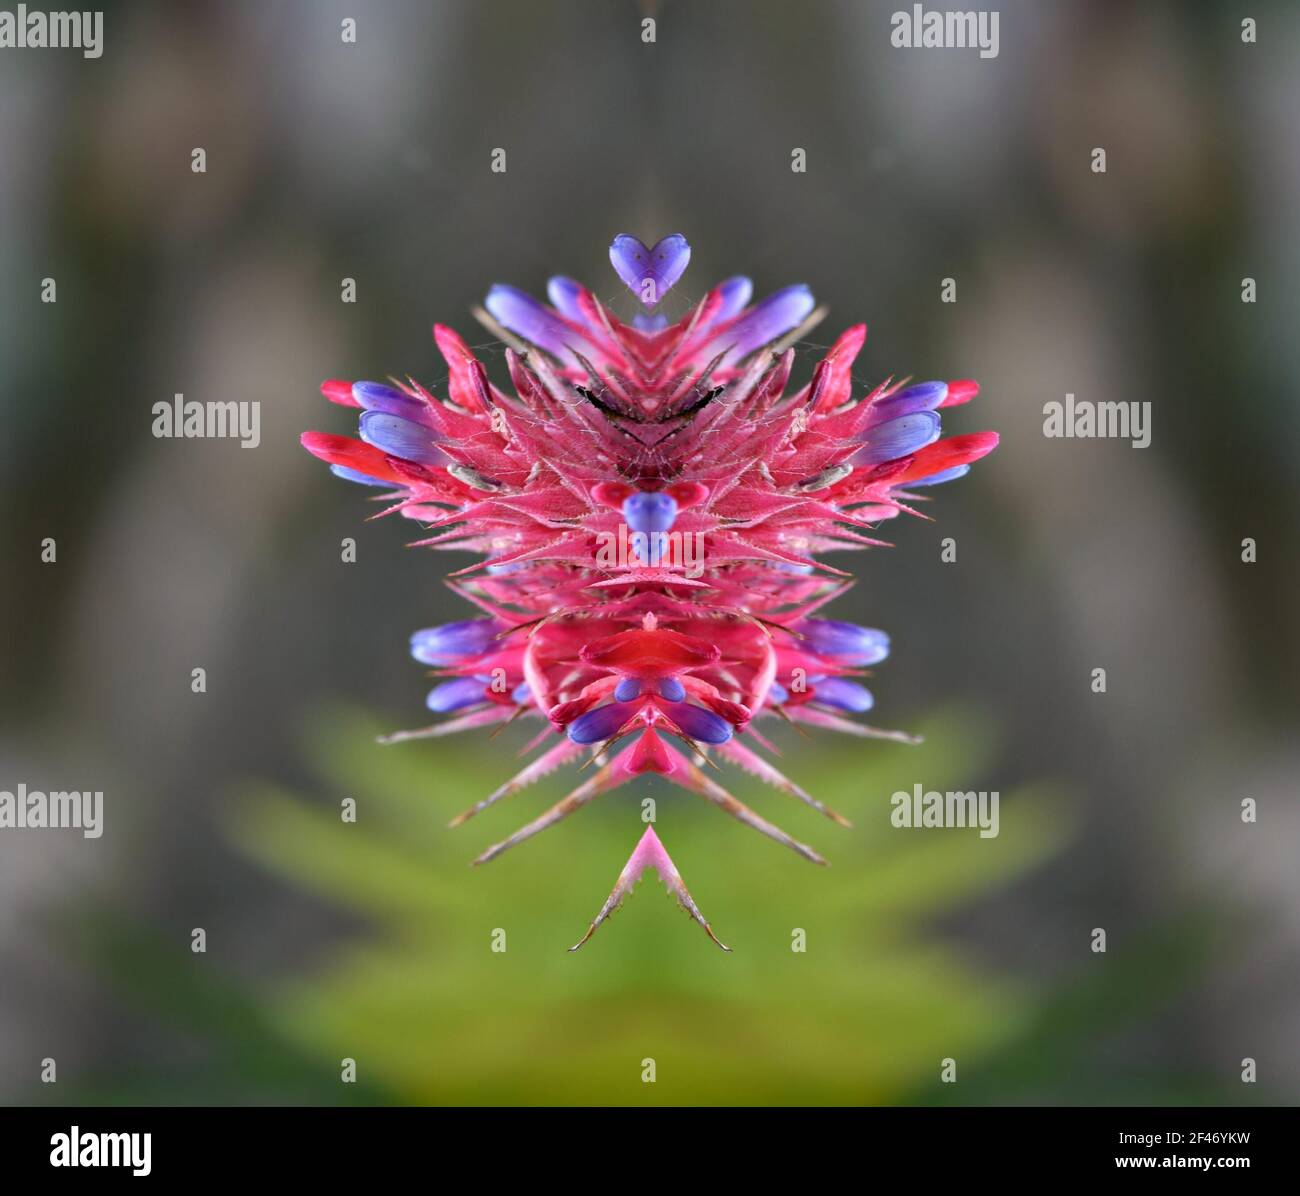 Bromeliad Aechmea, a tropical flowering plant  on an abstract composition. Stock Photo